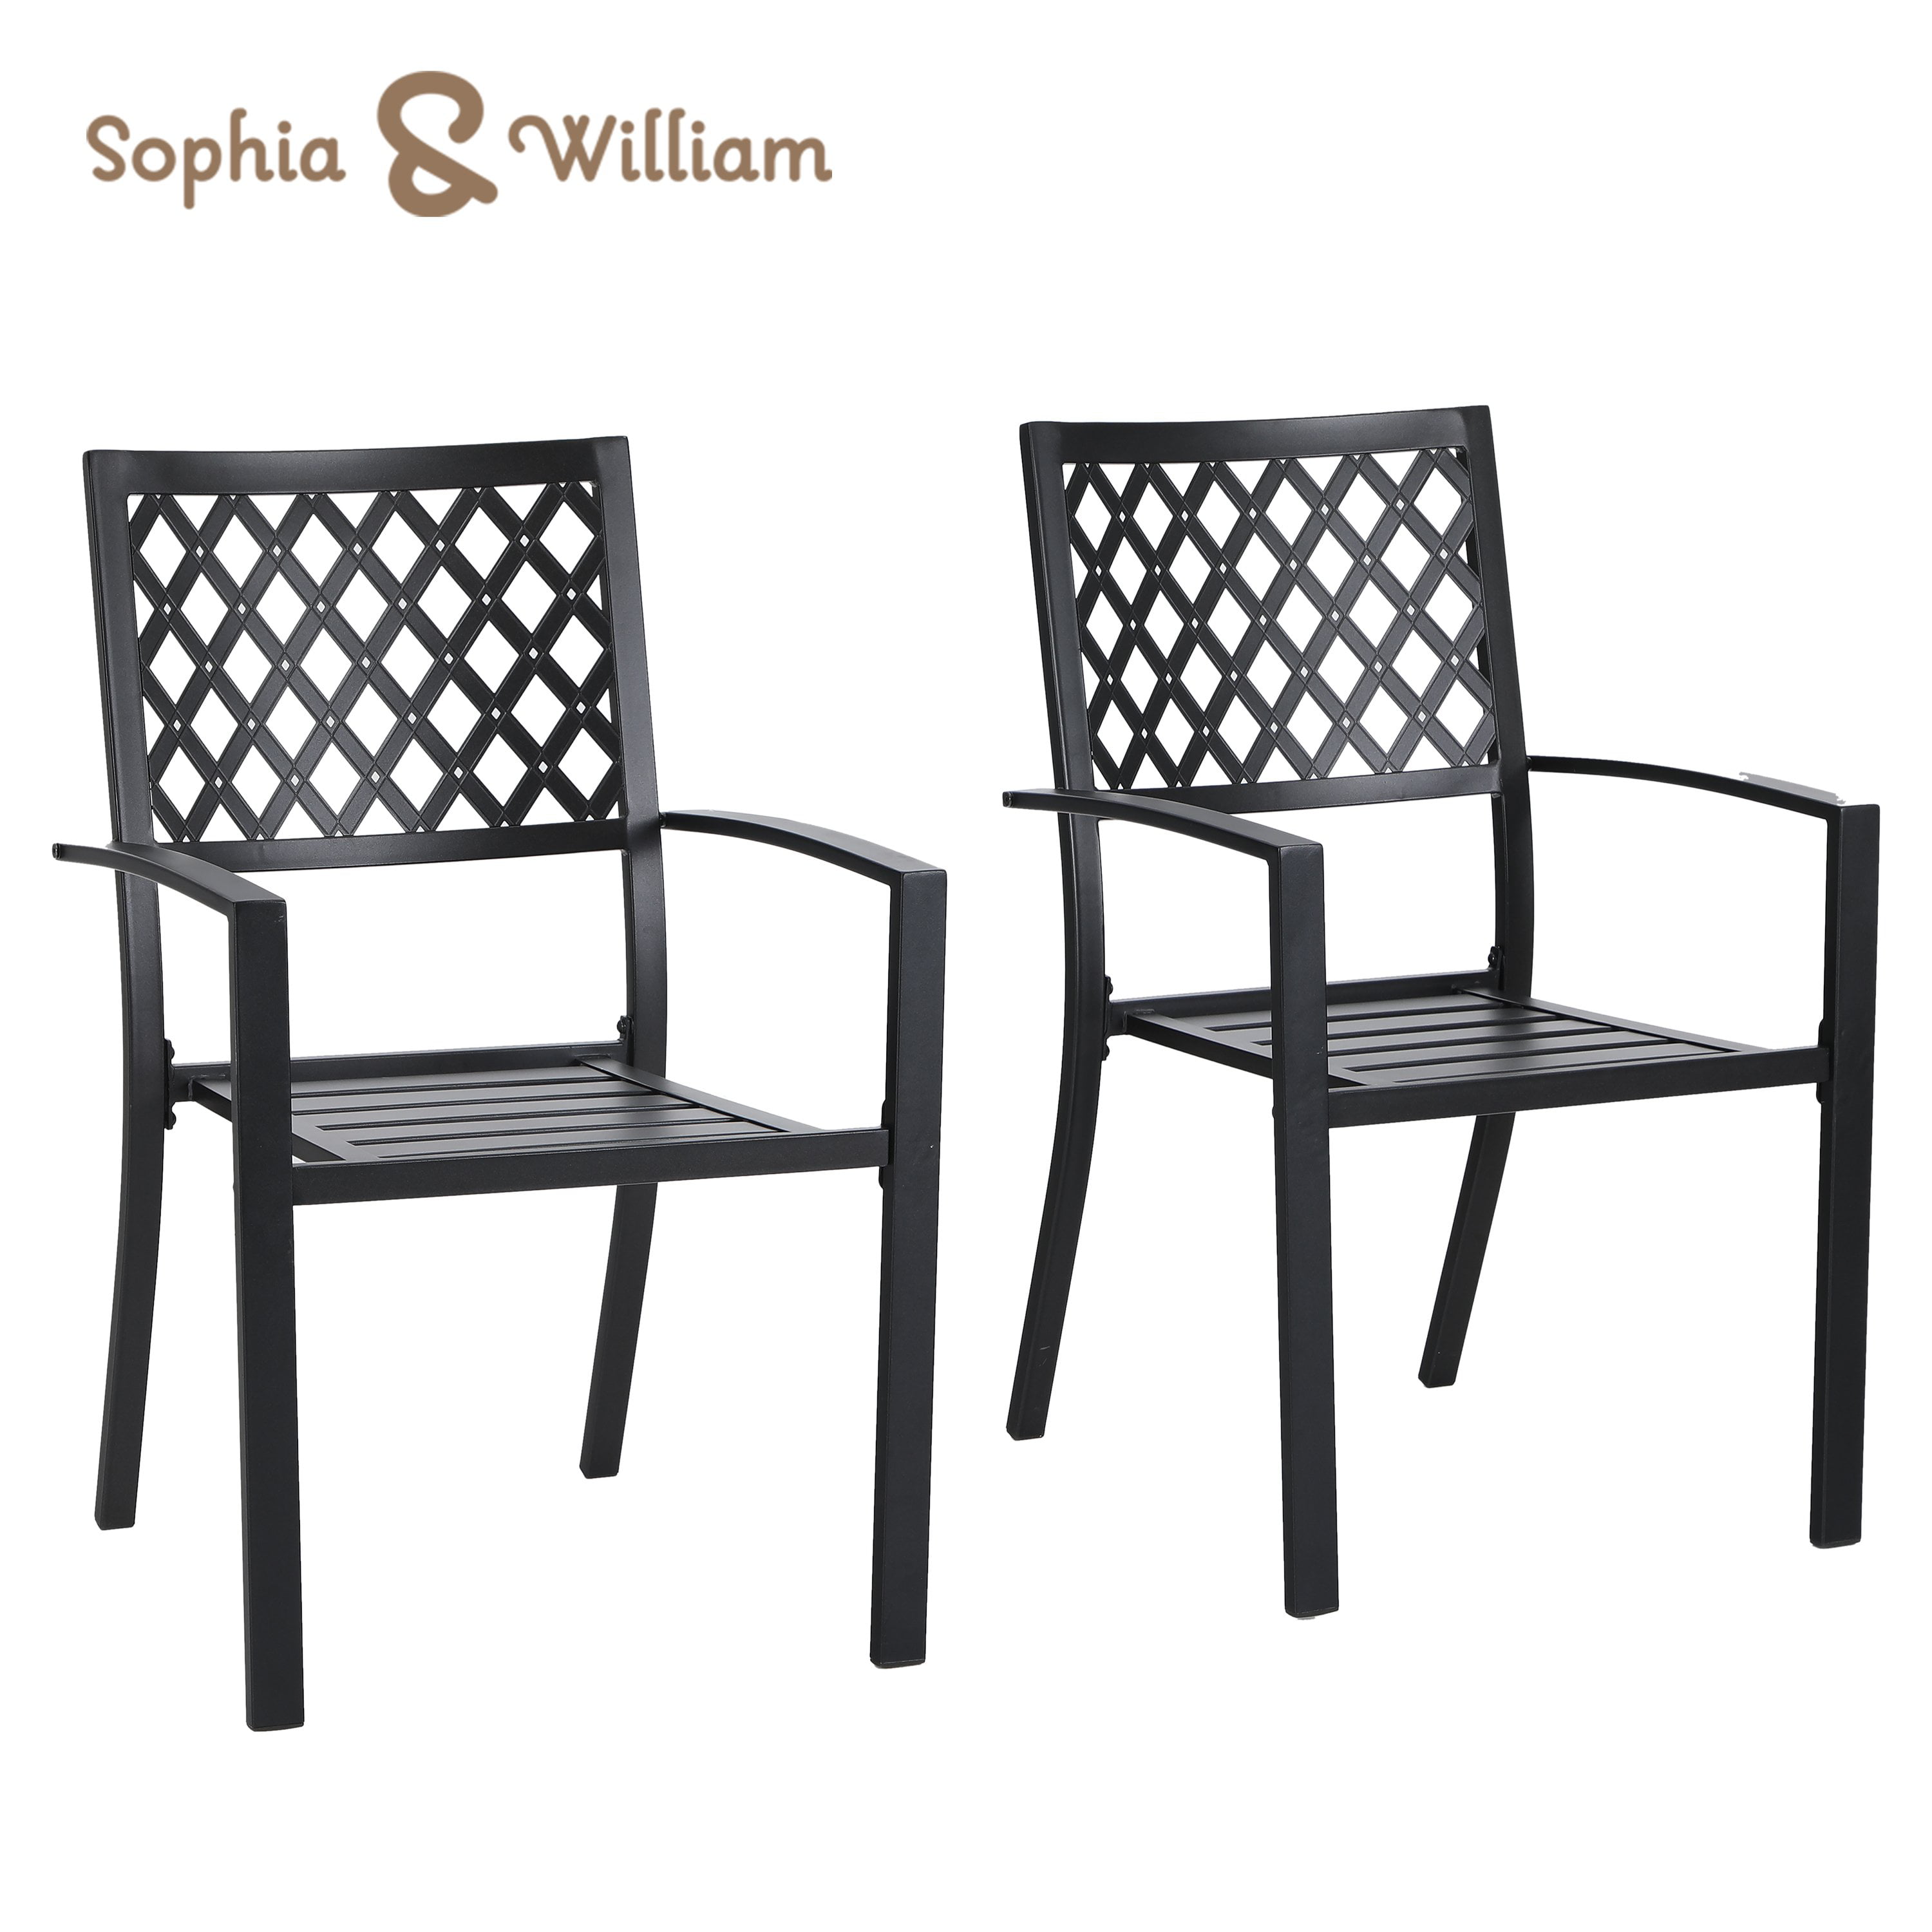 Sophia William 2pcs Outdoor Wrought, Heavy Duty Metal Outdoor Dining Chairs